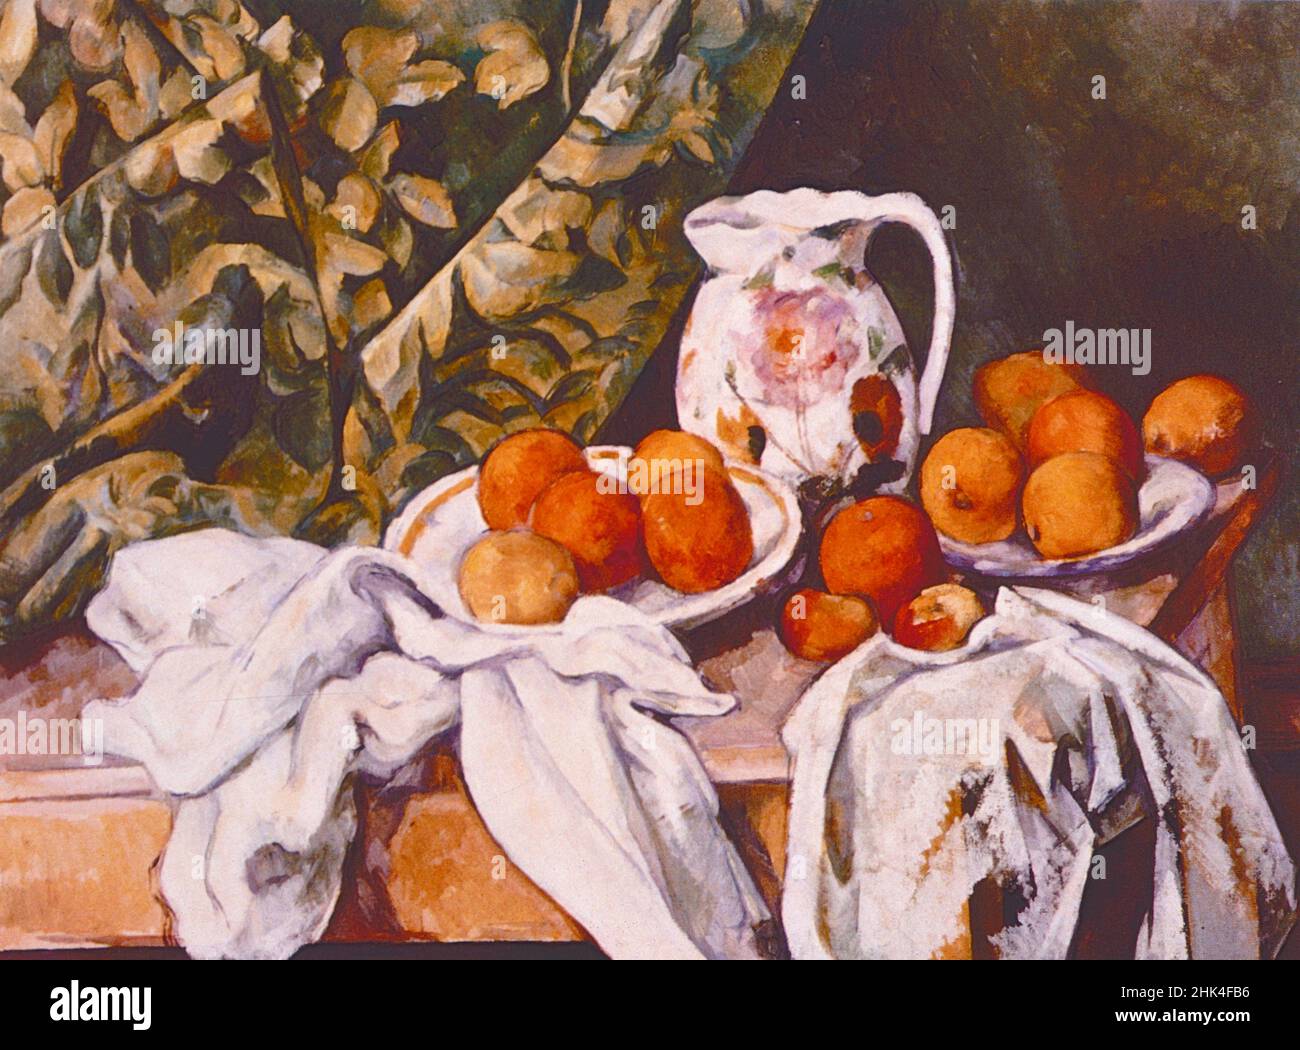 Still Life with Fruits, painting by French artist Paul Cezanne, 1870s Stock Photo